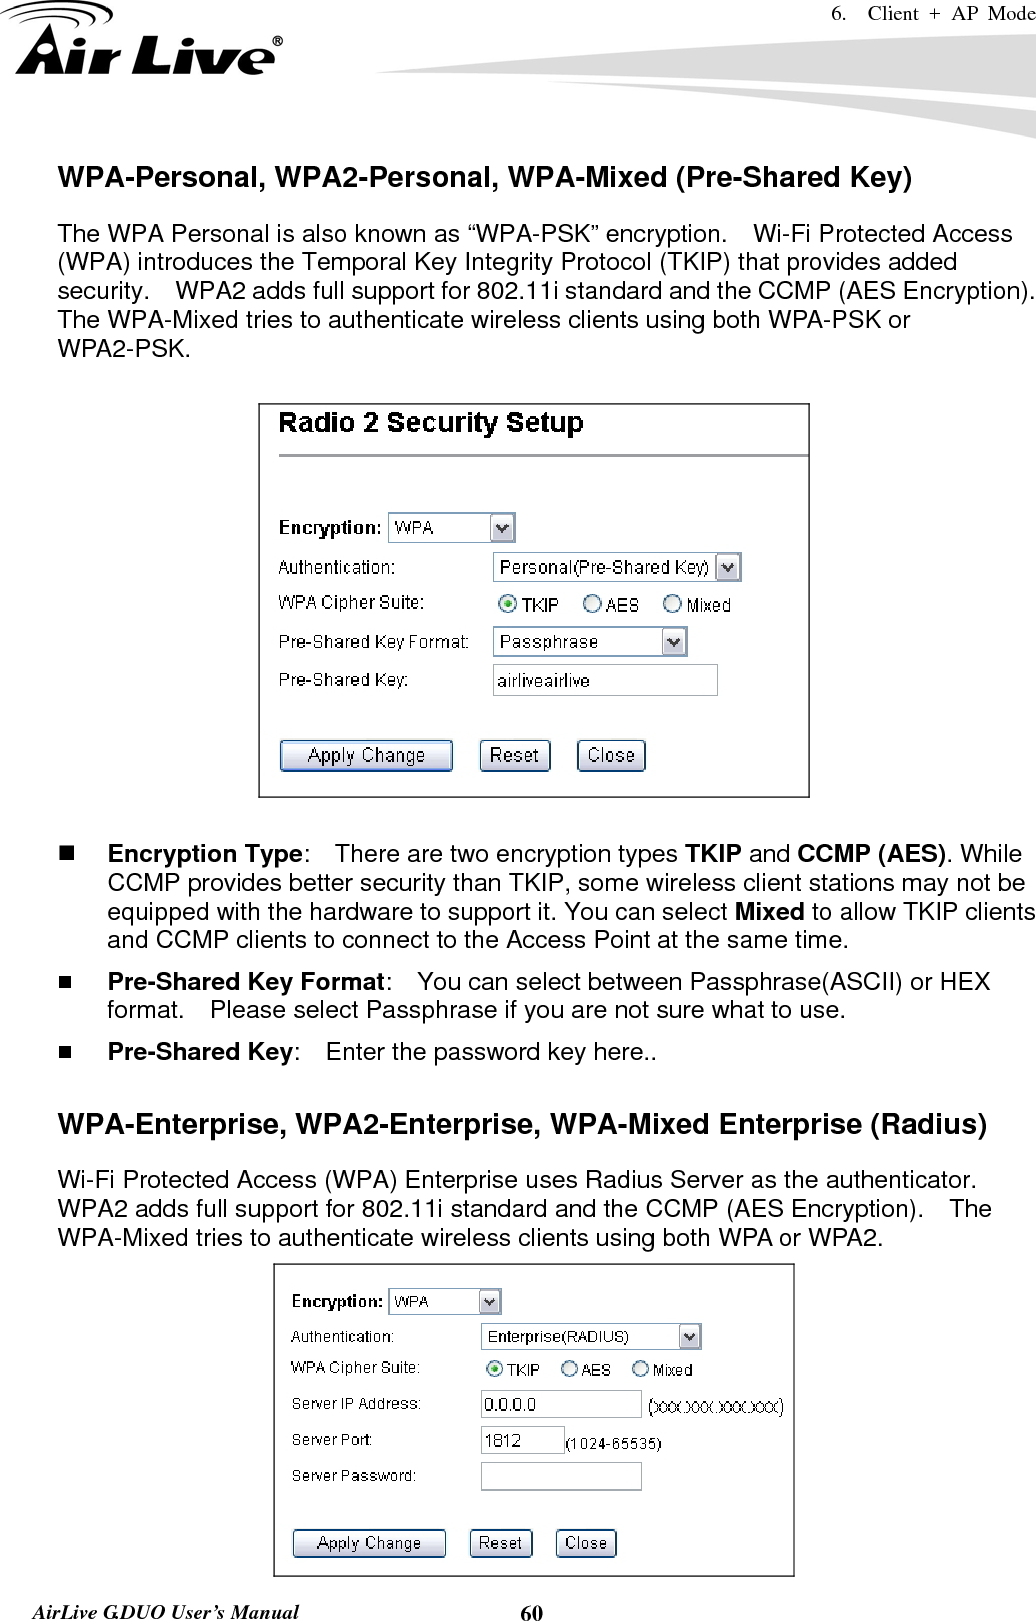 6.  Client + AP Mode   AirLive G.DUO User’s Manual  60WPA-Personal, WPA2-Personal, WPA-Mixed (Pre-Shared Key) The WPA Personal is also known as “WPA-PSK” encryption.    Wi-Fi Protected Access (WPA) introduces the Temporal Key Integrity Protocol (TKIP) that provides added security.    WPA2 adds full support for 802.11i standard and the CCMP (AES Encryption).   The WPA-Mixed tries to authenticate wireless clients using both WPA-PSK or WPA2-PSK.       Encryption Type:    There are two encryption types TKIP and CCMP (AES). While CCMP provides better security than TKIP, some wireless client stations may not be equipped with the hardware to support it. You can select Mixed to allow TKIP clients and CCMP clients to connect to the Access Point at the same time.    Pre-Shared Key Format:    You can select between Passphrase(ASCII) or HEX format.    Please select Passphrase if you are not sure what to use.  Pre-Shared Key:    Enter the password key here..  WPA-Enterprise, WPA2-Enterprise, WPA-Mixed Enterprise (Radius) Wi-Fi Protected Access (WPA) Enterprise uses Radius Server as the authenticator.   WPA2 adds full support for 802.11i standard and the CCMP (AES Encryption).    The WPA-Mixed tries to authenticate wireless clients using both WPA or WPA2.      